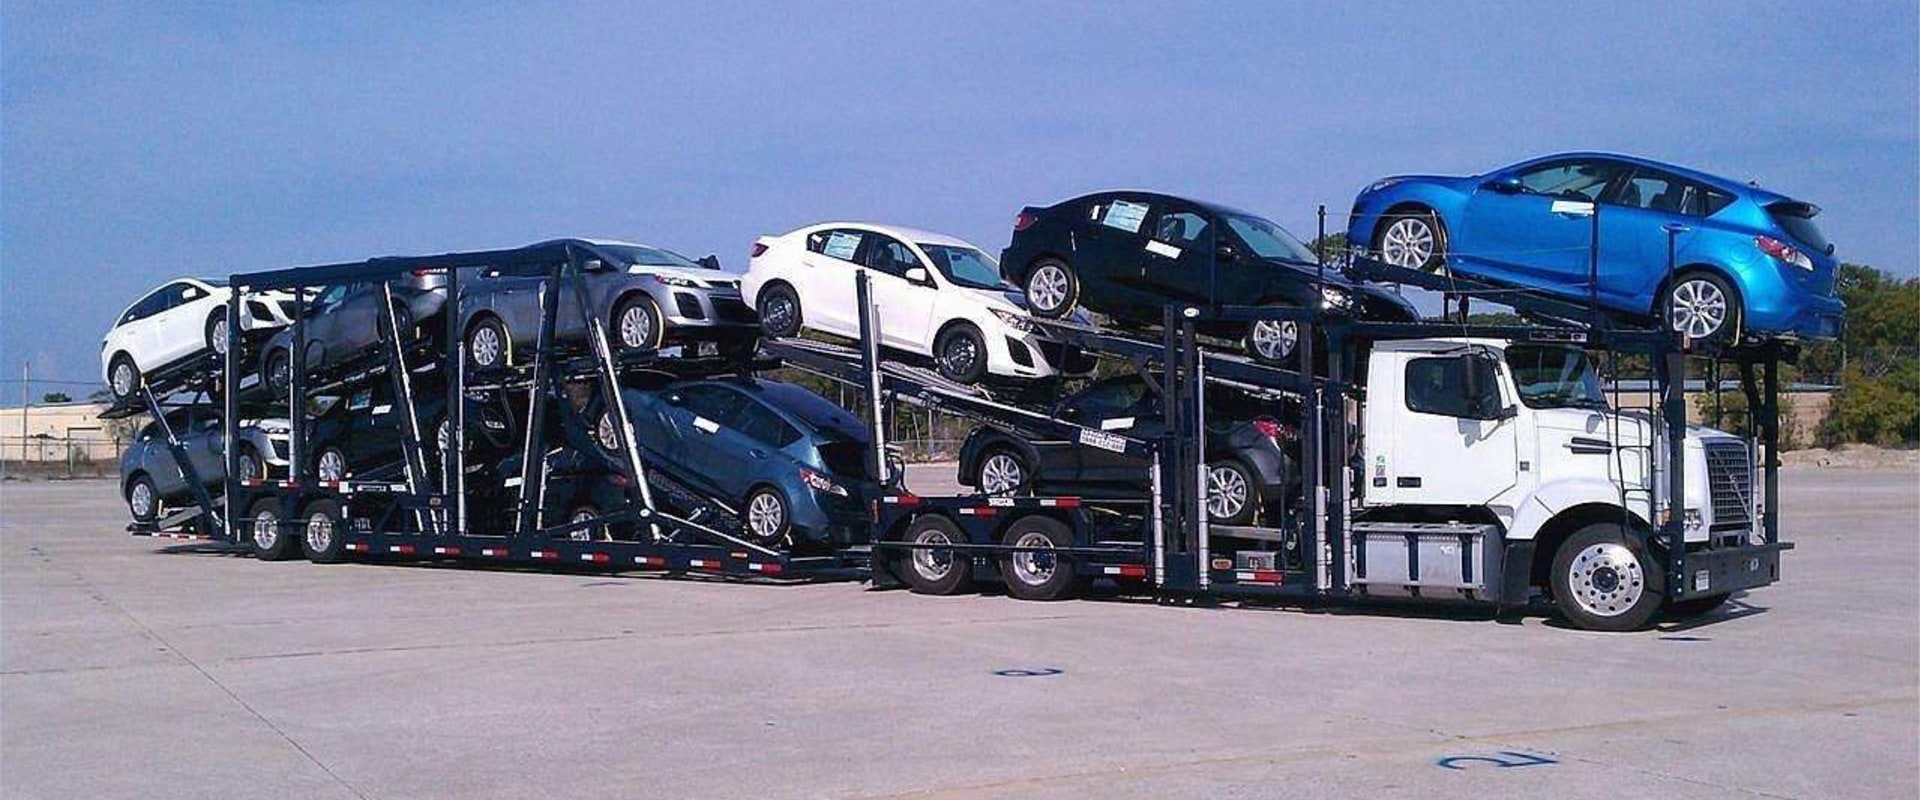 How many cars can an auto carrier hold?